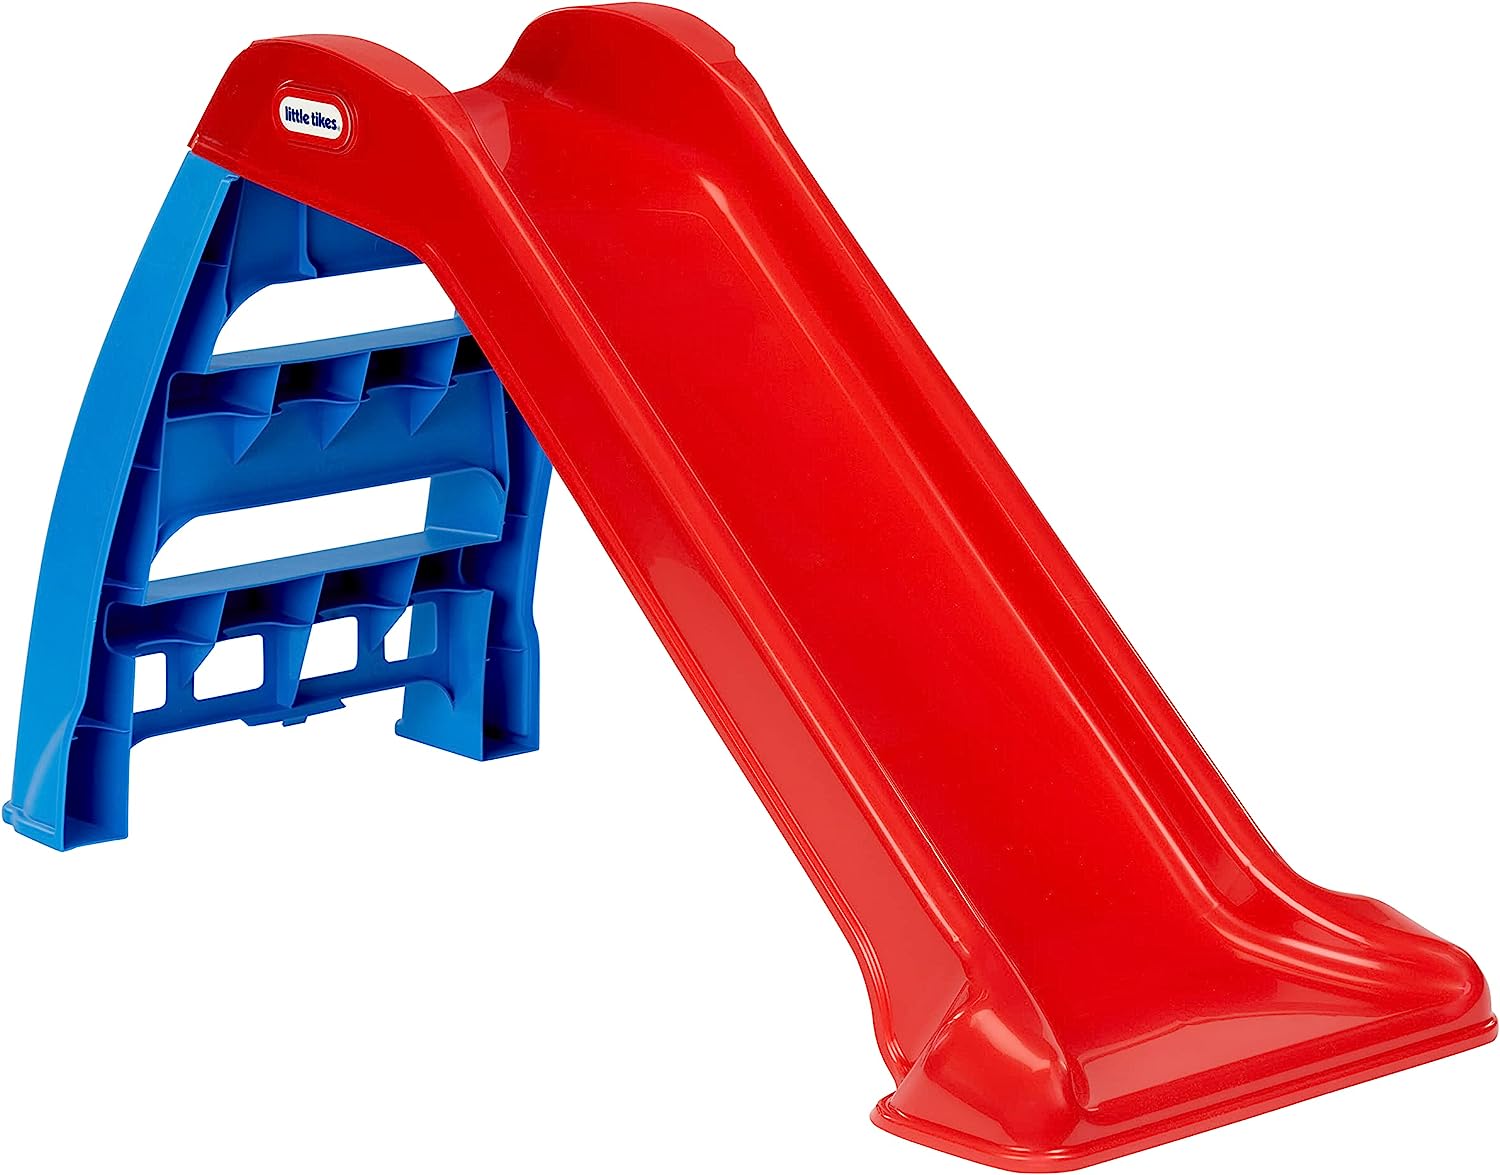 Little Tikes First Red Slide with blue stairs